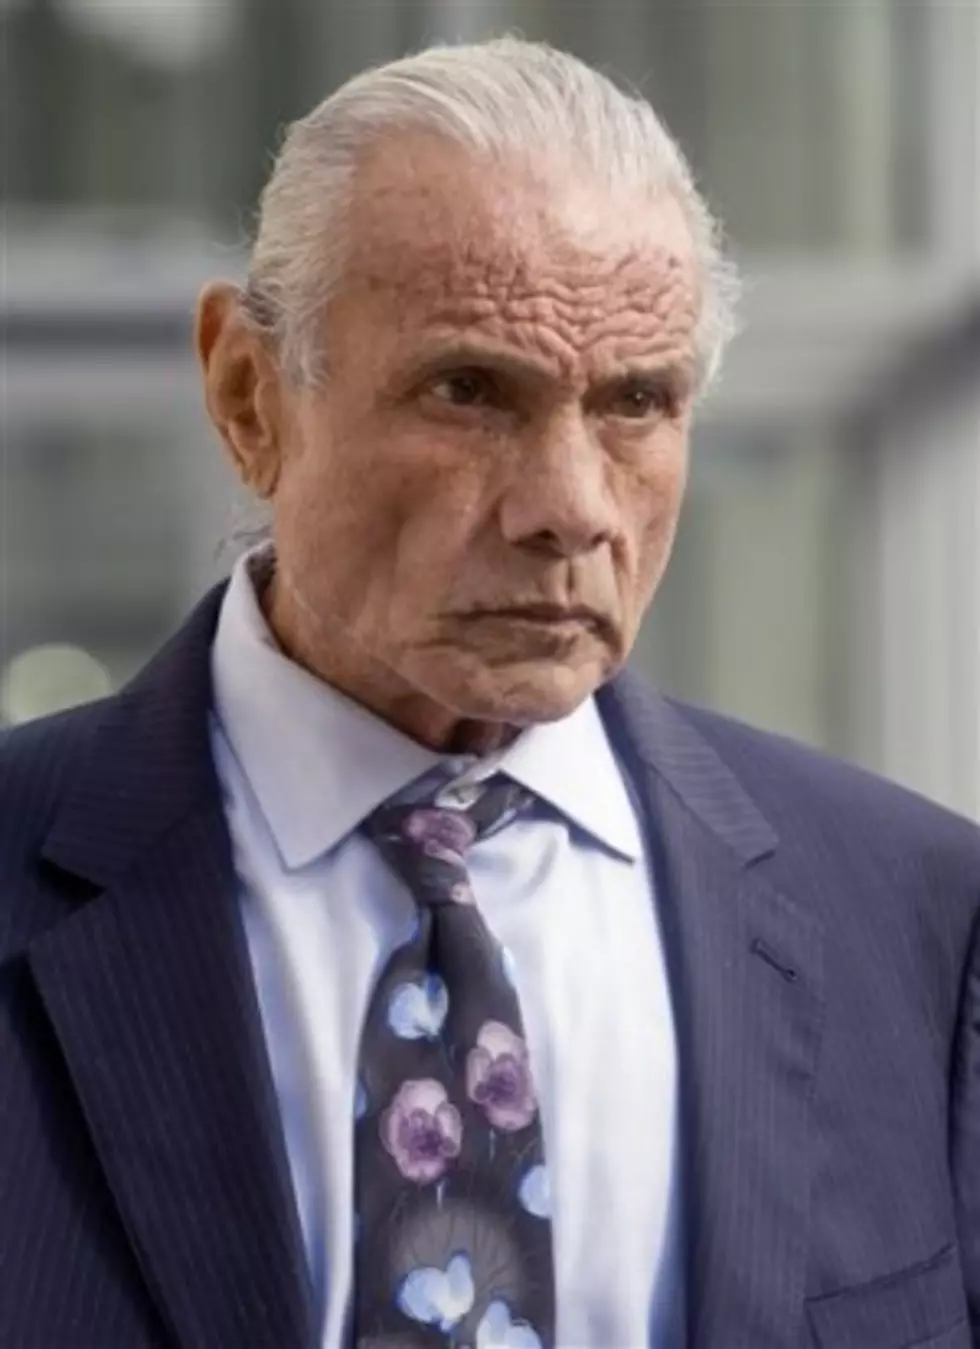 &#8216;Superfly&#8217; Snuka testifies he can&#8217;t remember mom&#8217;s name